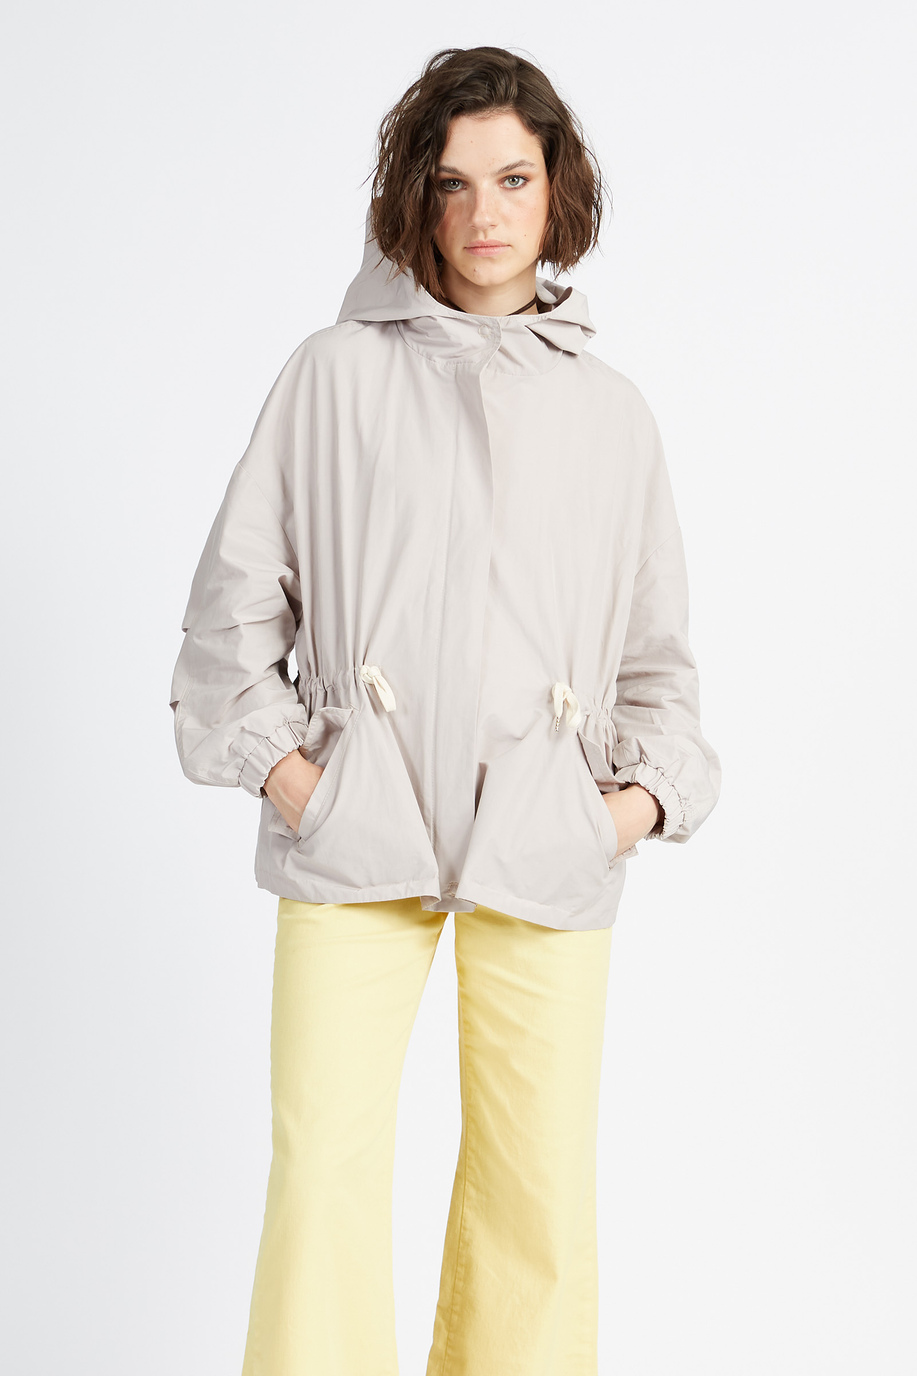 Solid color women's capsule Spring Weekend trench jacket with pockets - Vandani - Preview | La Martina - Official Online Shop